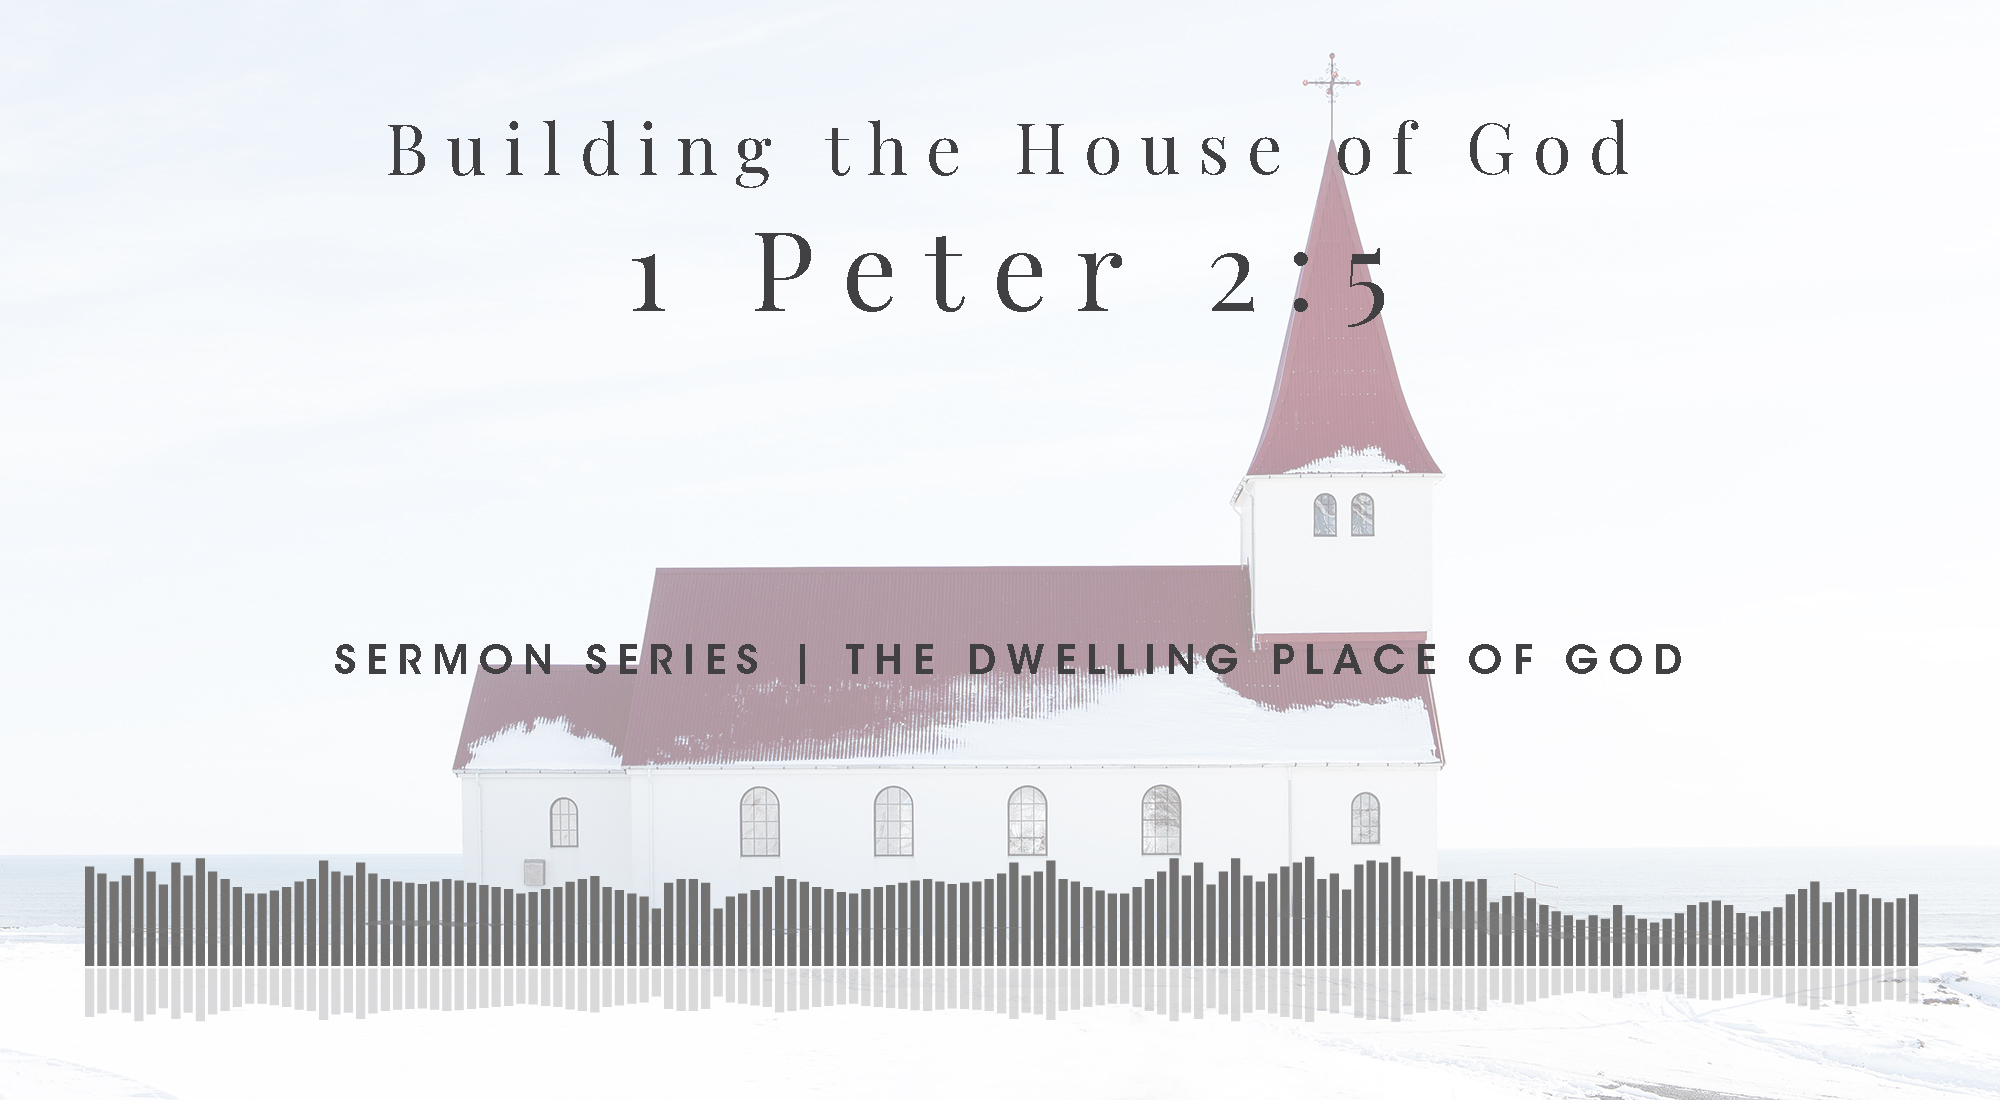 Building the House of God